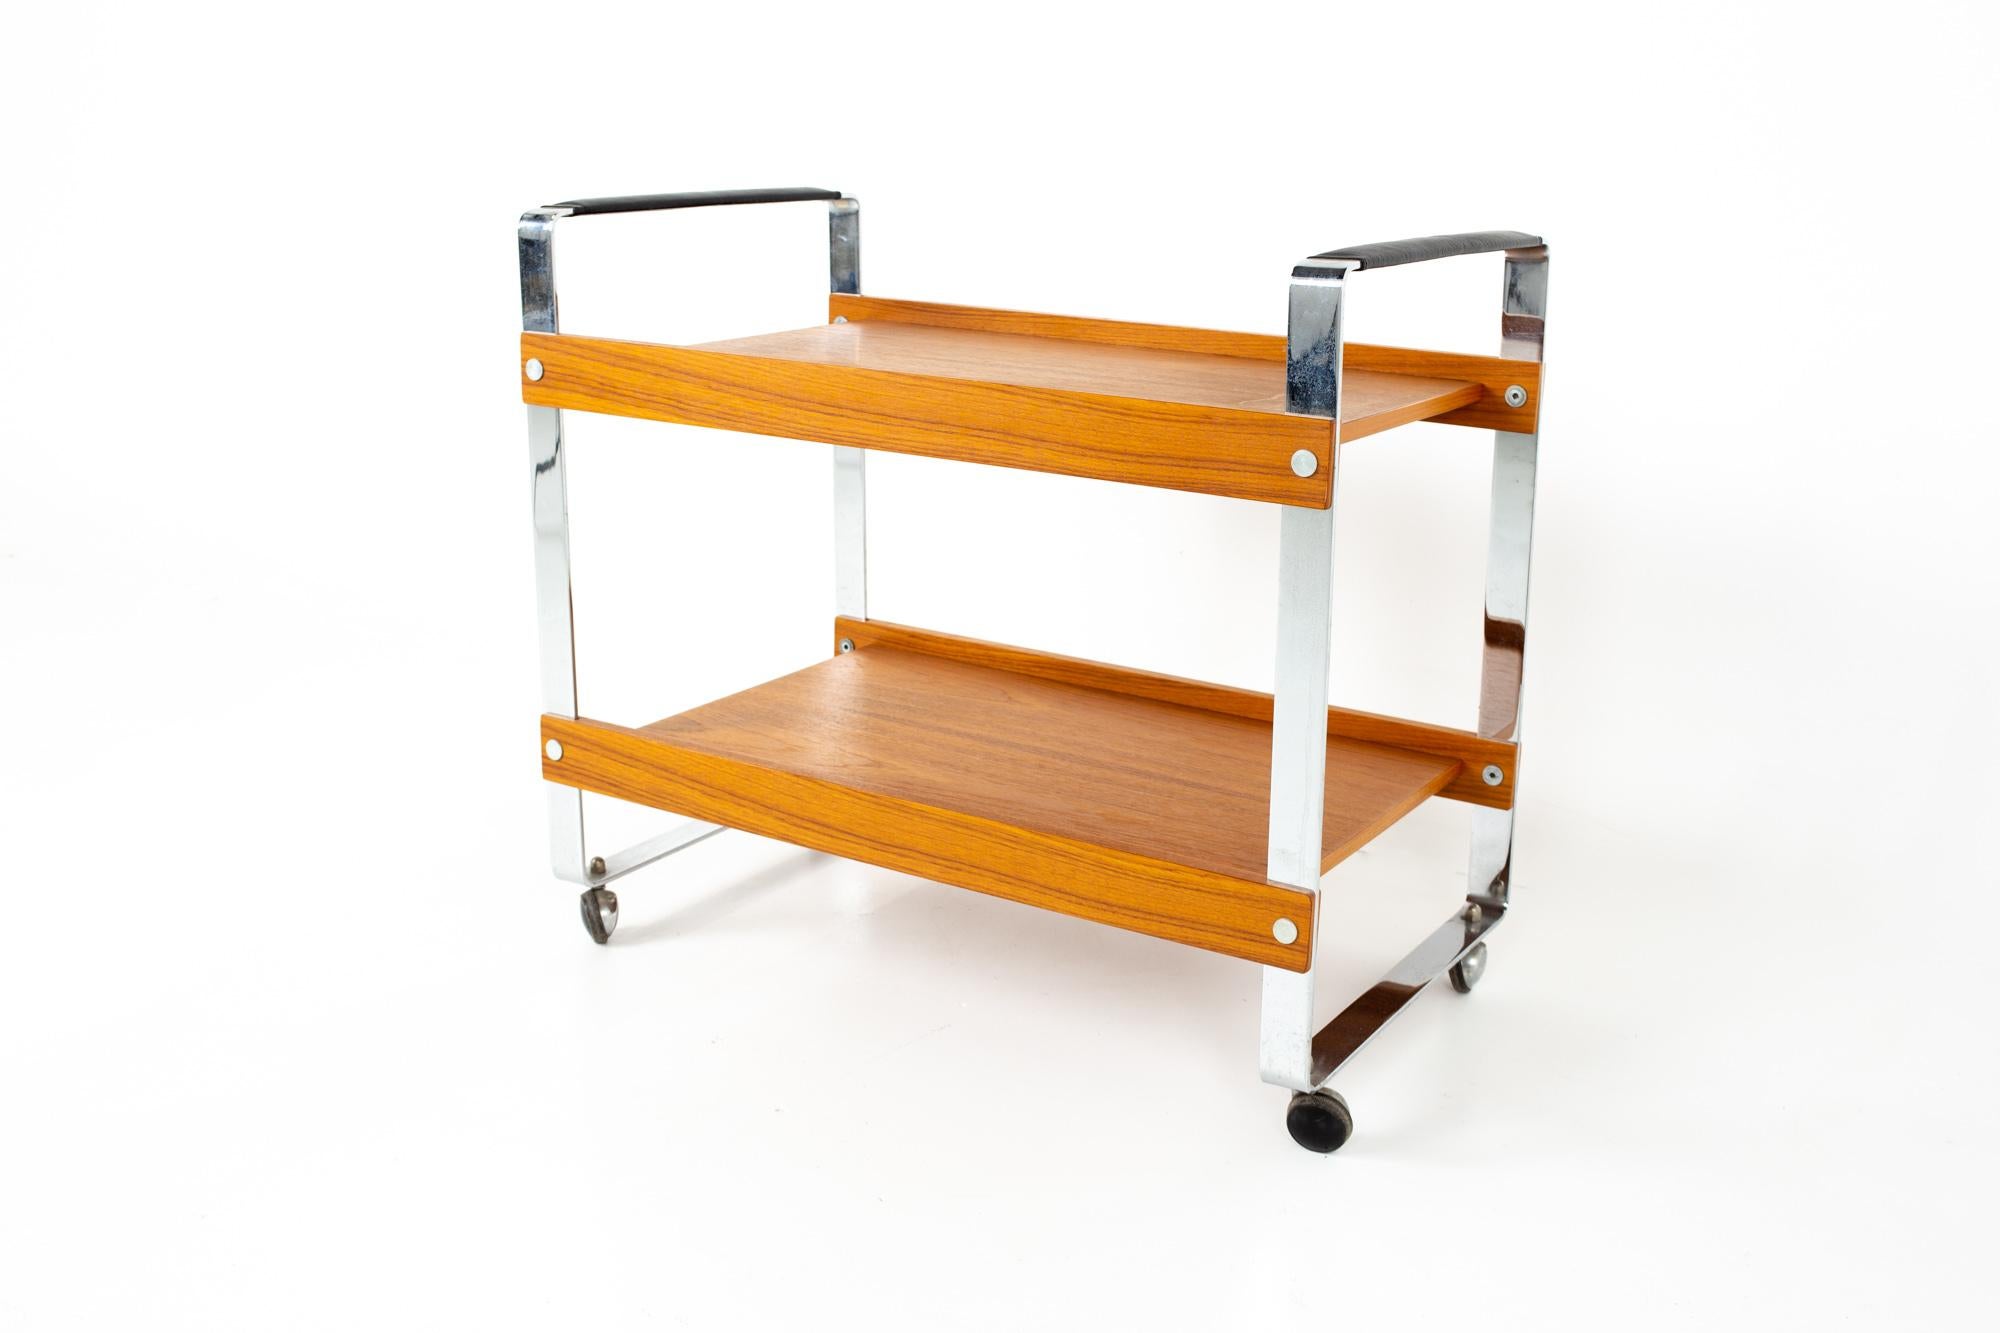 Mid century teak chrome and leather bar serving cart
Cart measures: 29.75 wide x 18.25 deep x 29.5 high

All pieces of furniture can be had in what we call restored vintage condition. That means the piece is restored upon purchase so it’s free of